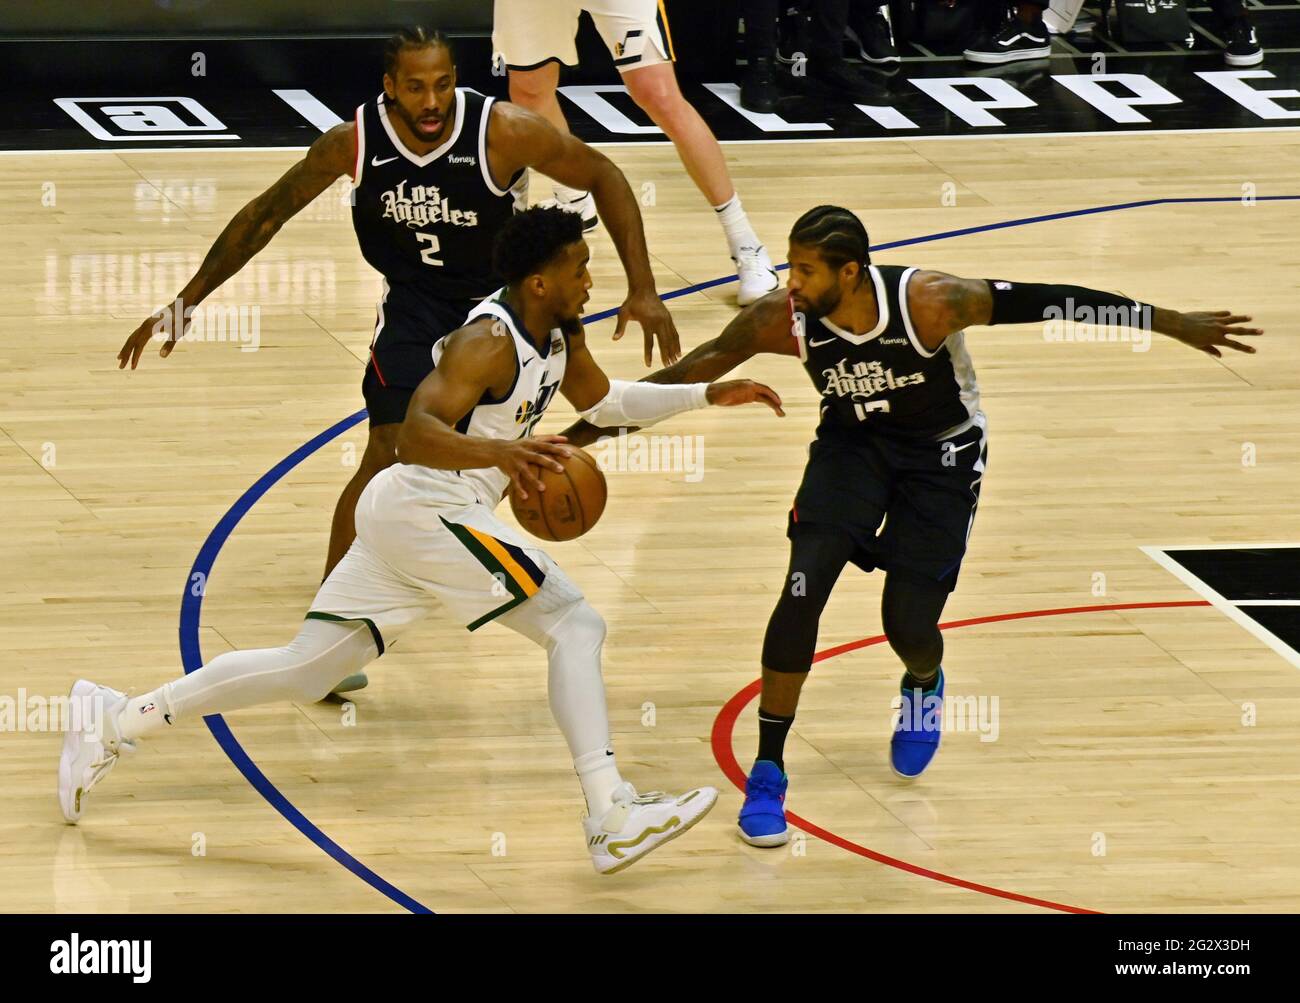 Los Angeles, Ca. 13th June, 2021. Utah Jazz guard Donovan Mitchell (45) drives against Los Angeles Clippers forward Kawhi Leonard (2) and guard Paul George (13) during the second half of Game 3 of the Western Conference second-round playoffs at Staples Center in Los Angeles on Saturday, June 12, 2021. The Clippers rallied to win another game 3, a 132-106 win over the Utah Jazz that cuts their deficit in this second-round series to 2-1 entering Monday's fourth game. Photo by Jim Ruymen/UPI Credit: UPI/Alamy Live News Stock Photo